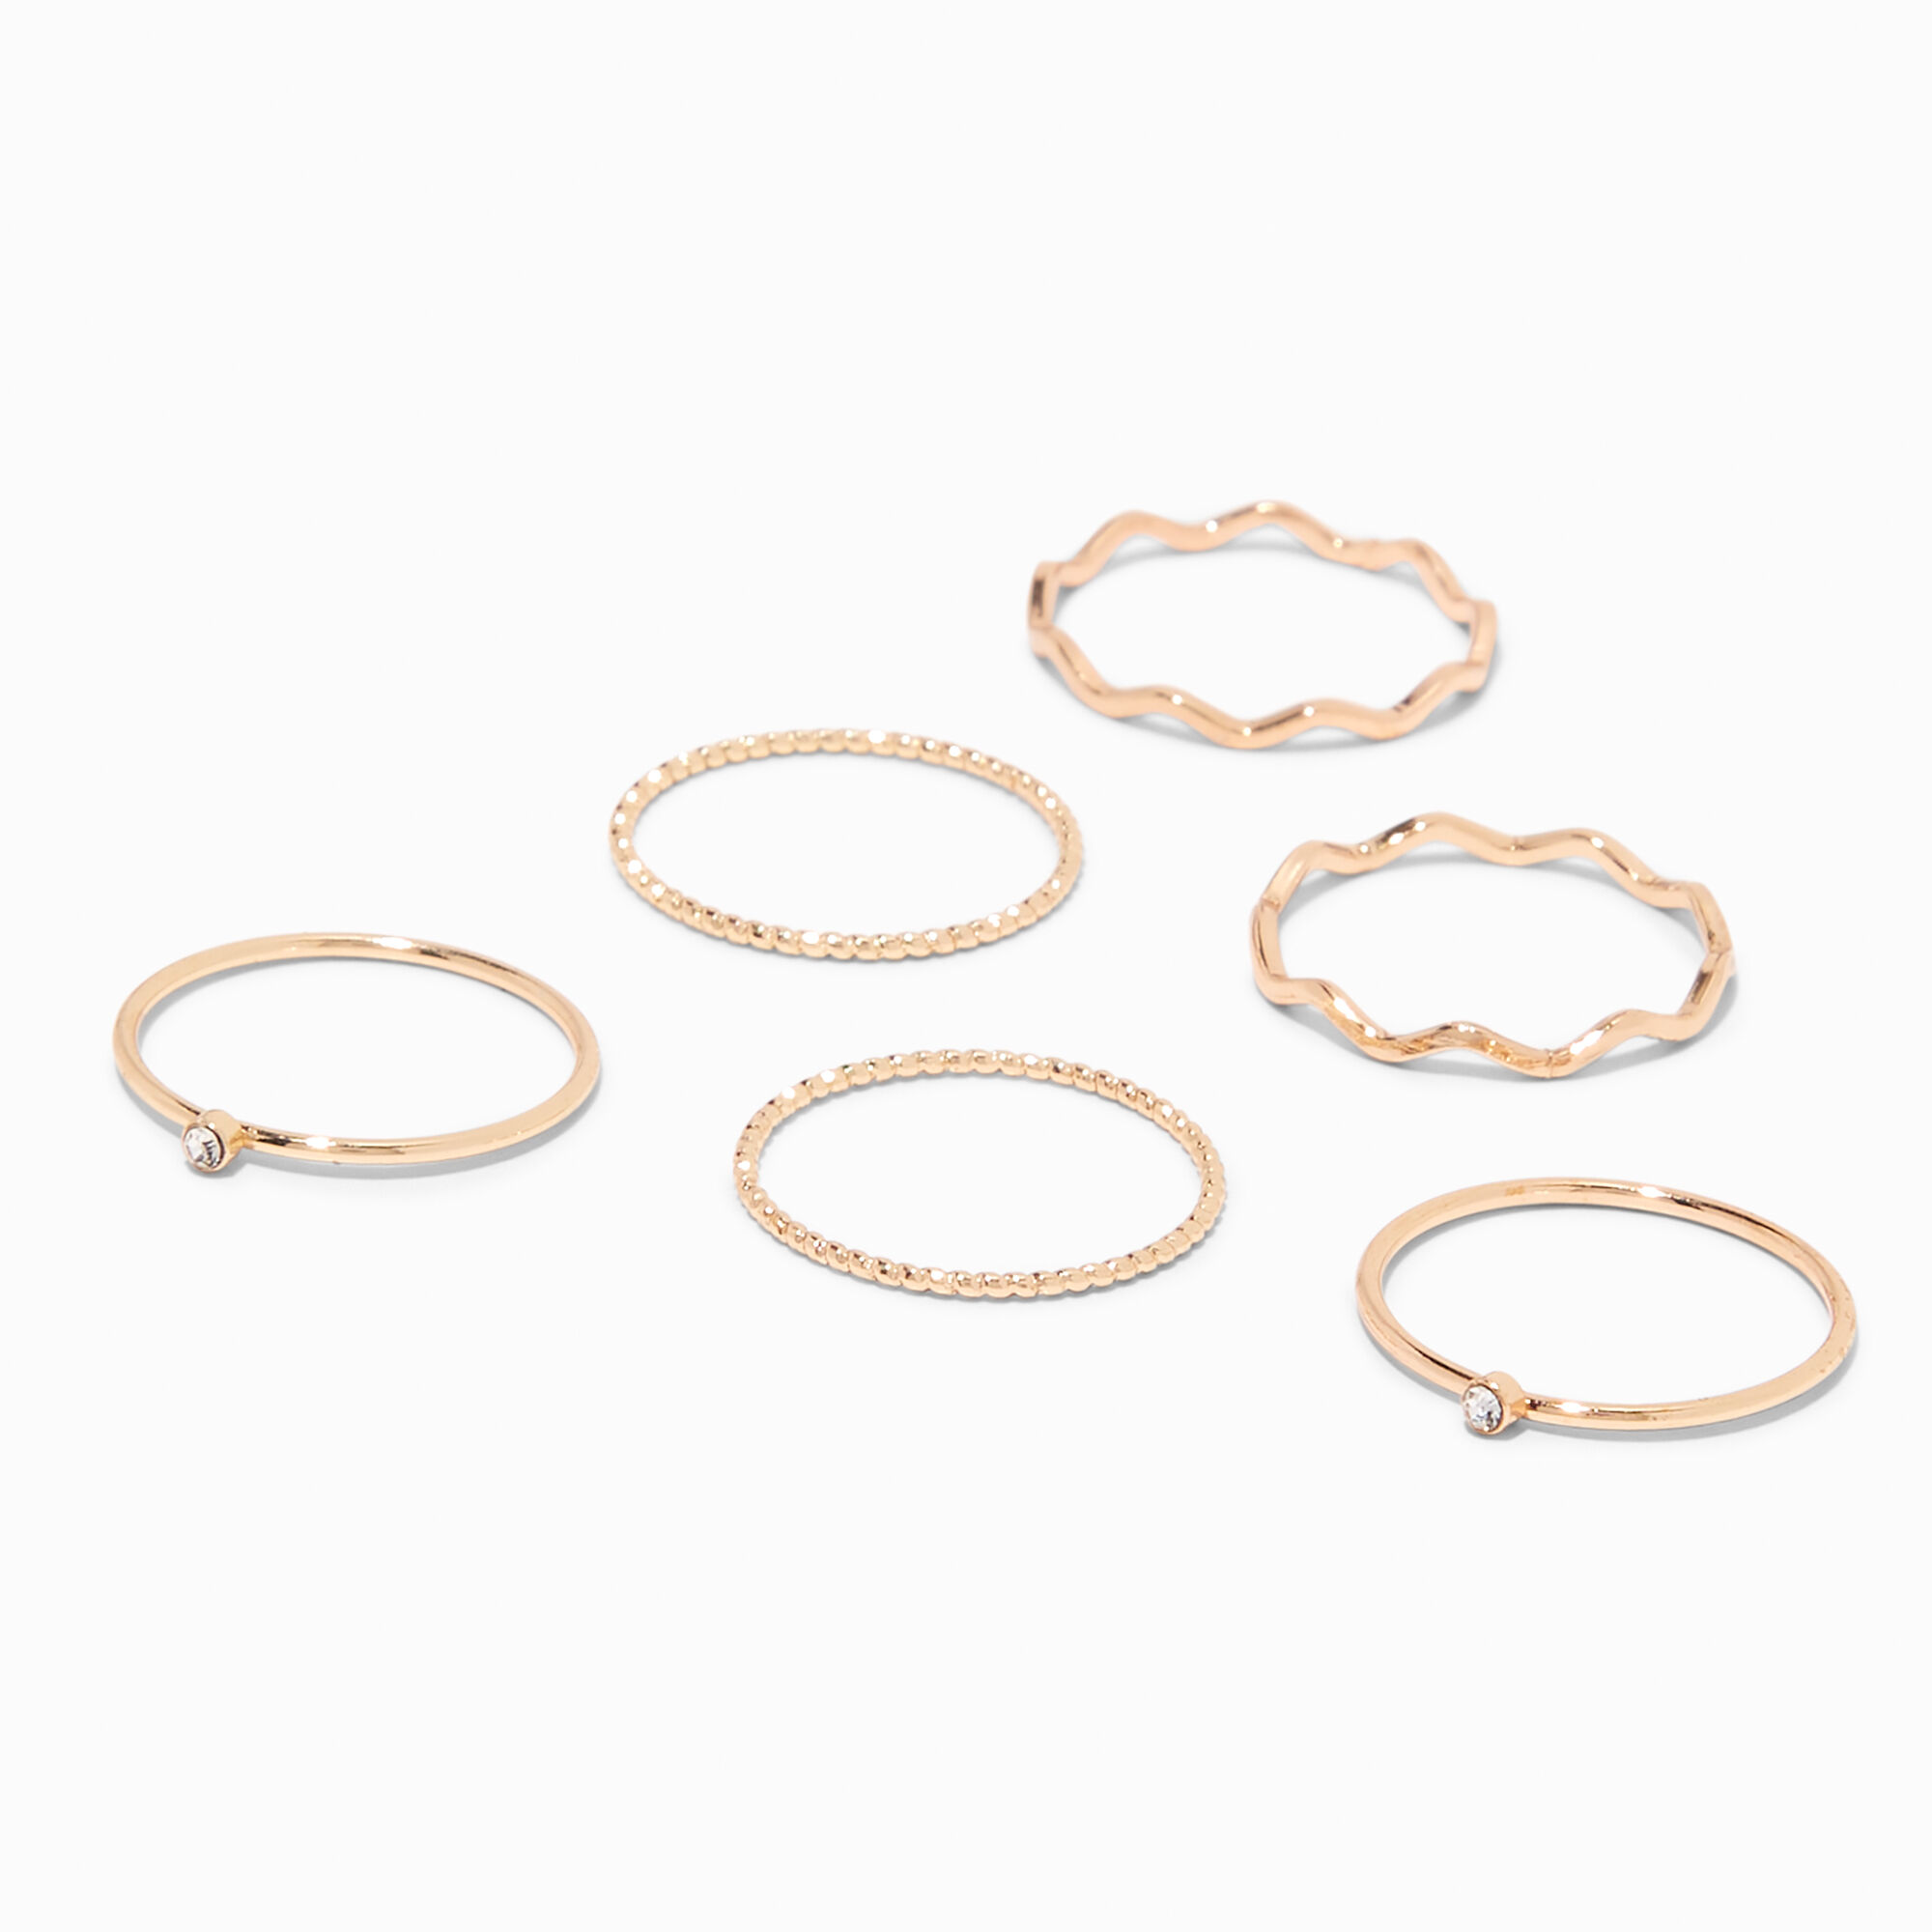 View Claires Textured Rings 6 Pack Gold information